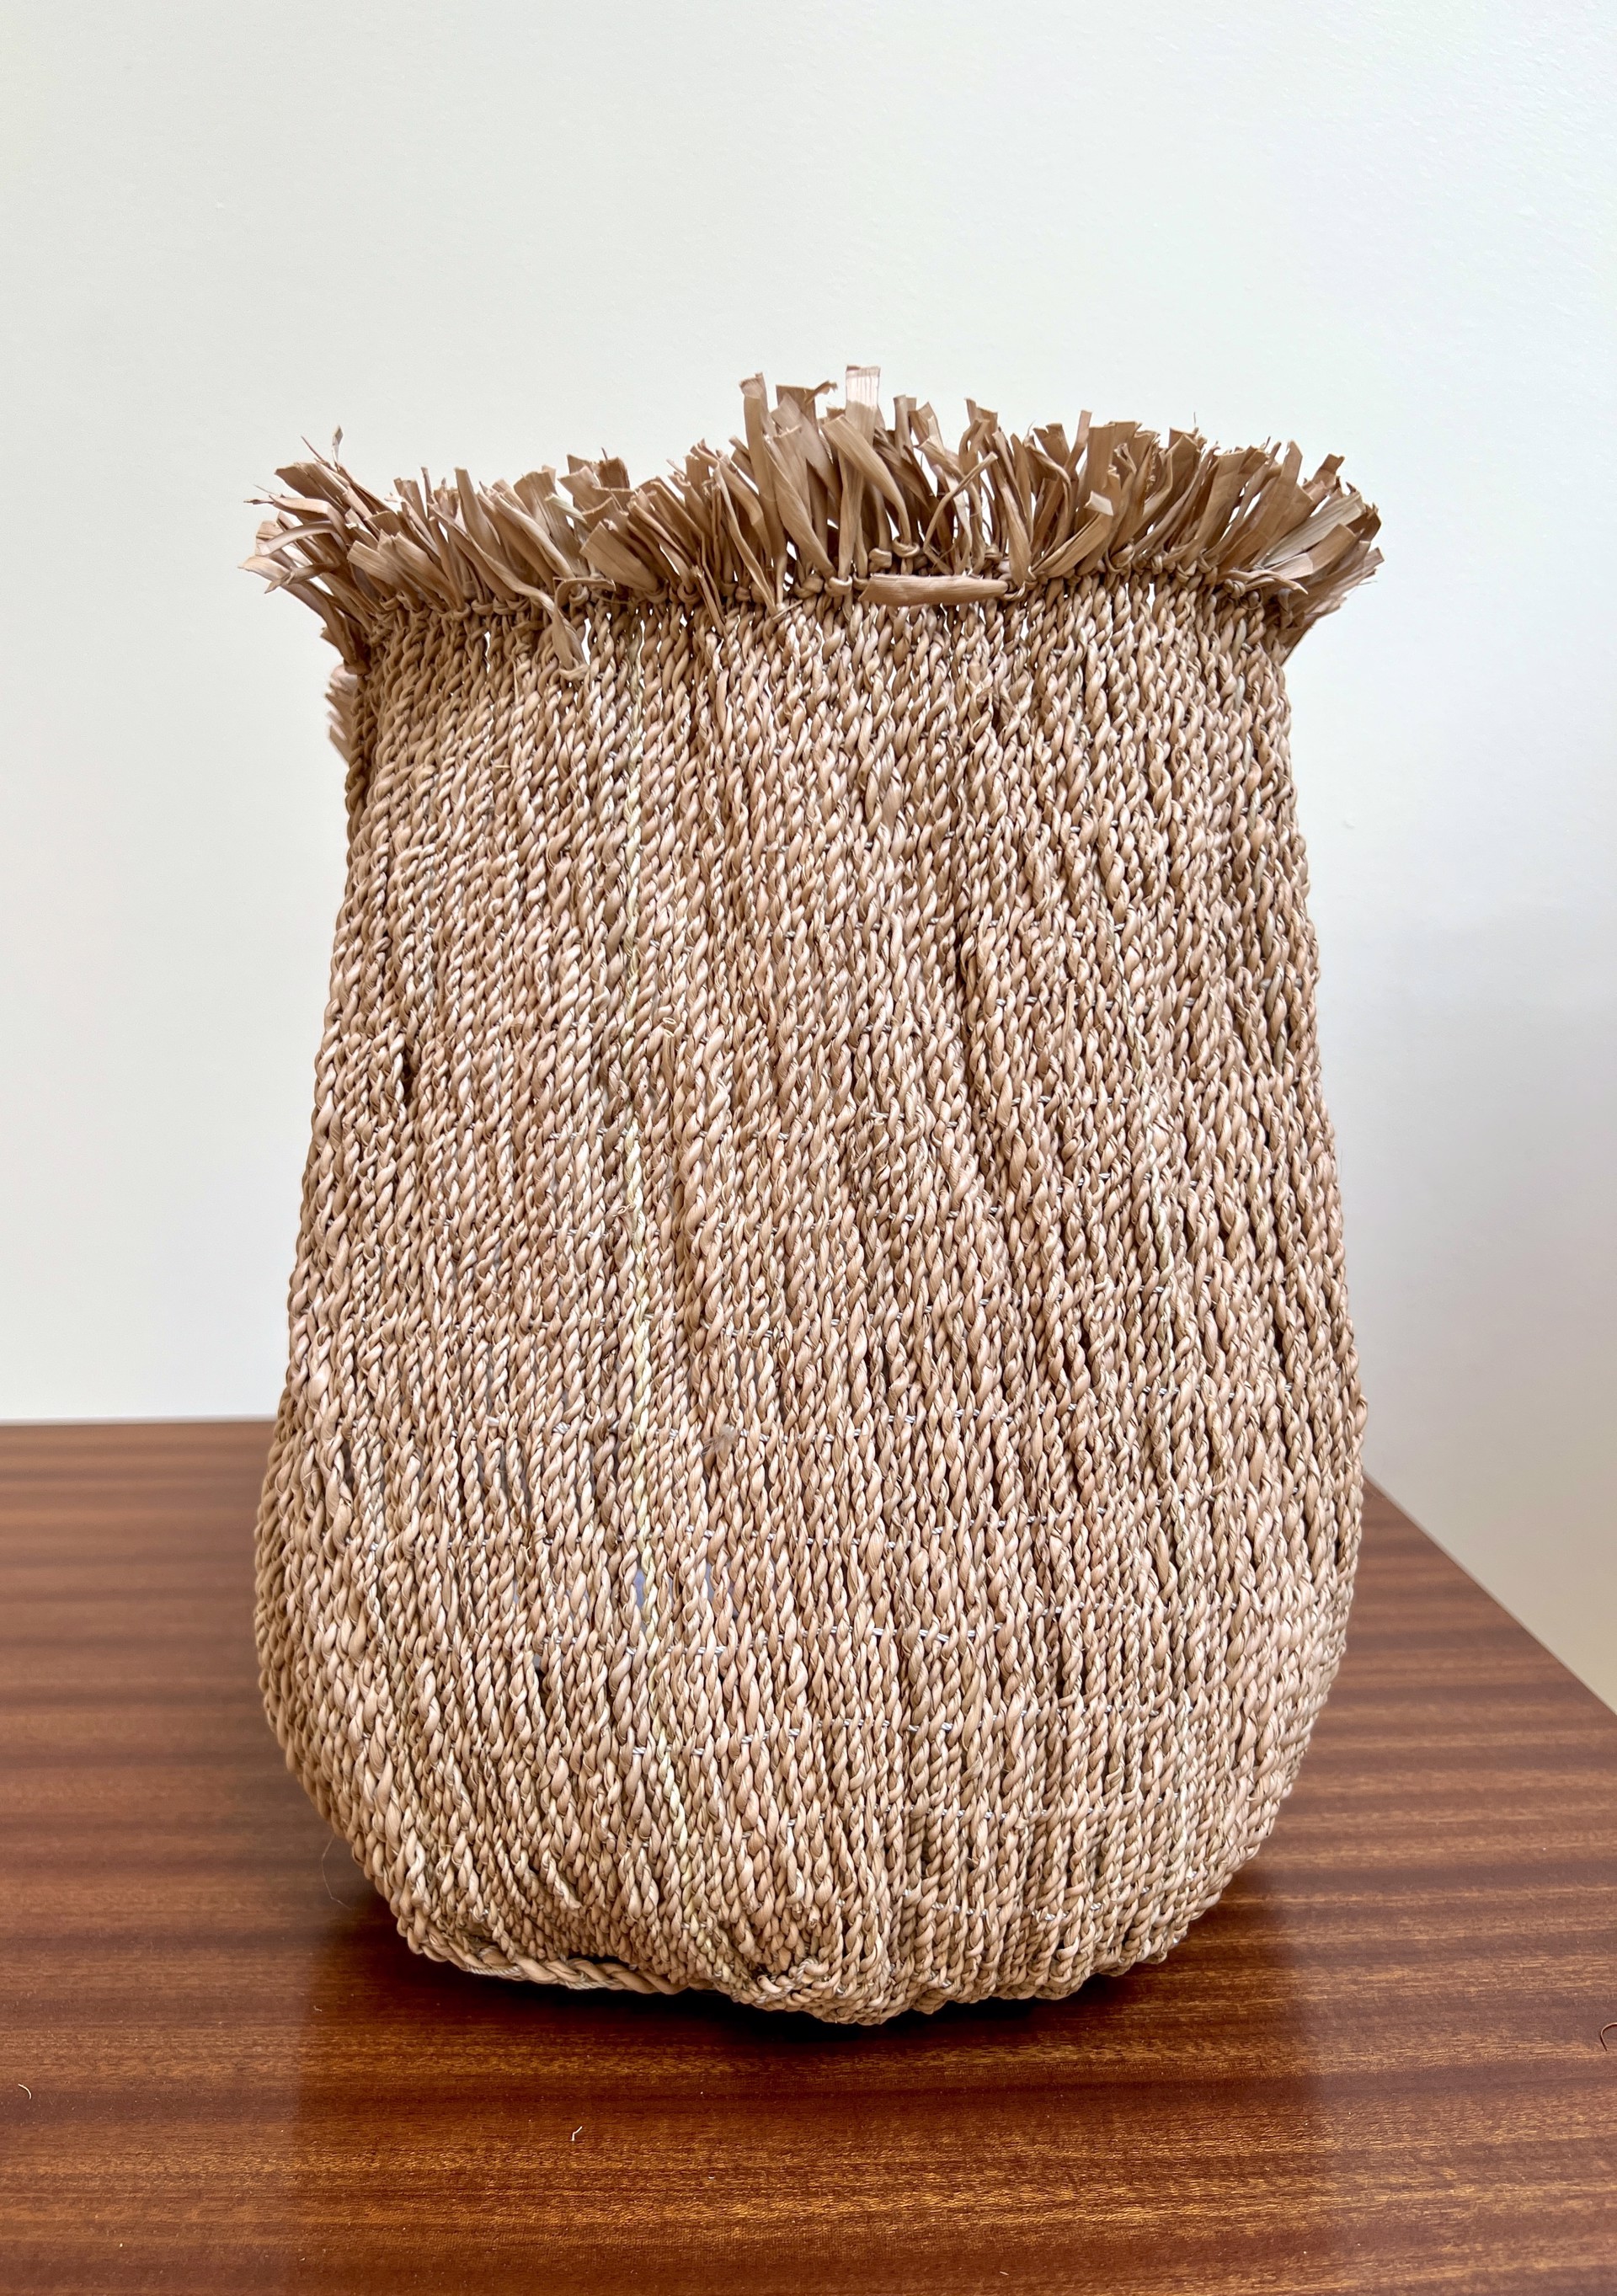 Small Straw Beer Basket 6 by Omba Arts